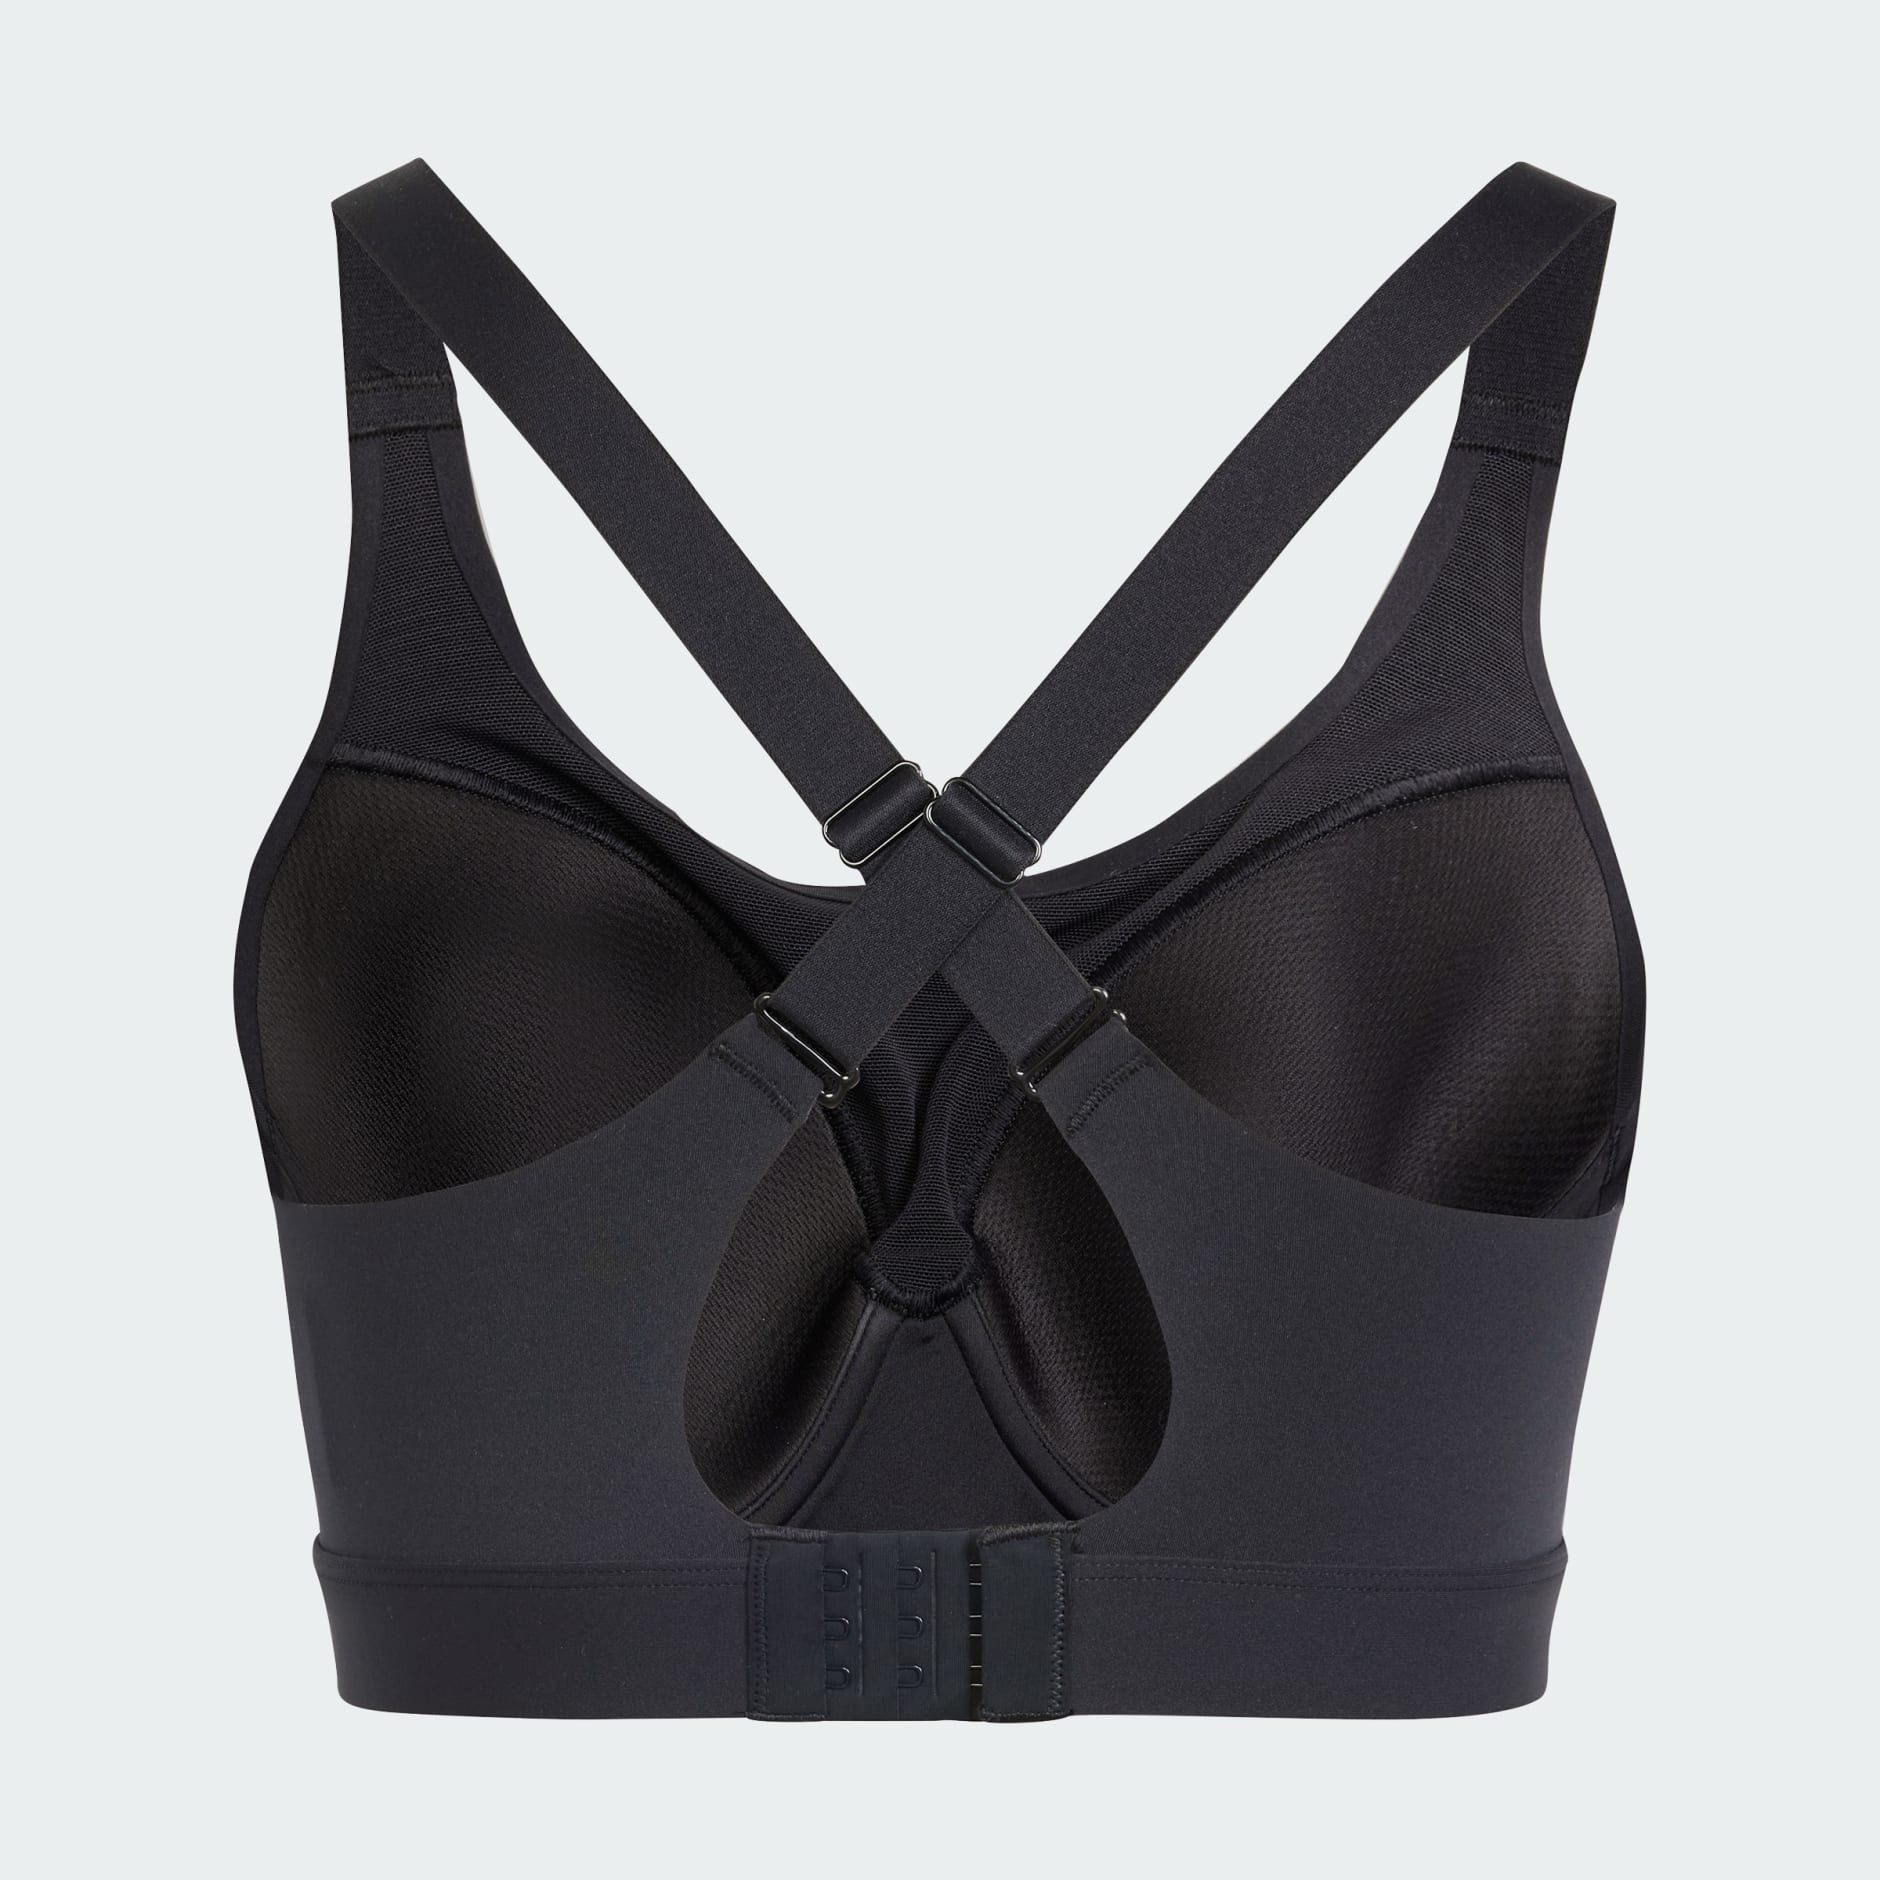 Adidas / Women's TLRD Impact Luxe Training High-Support Bra